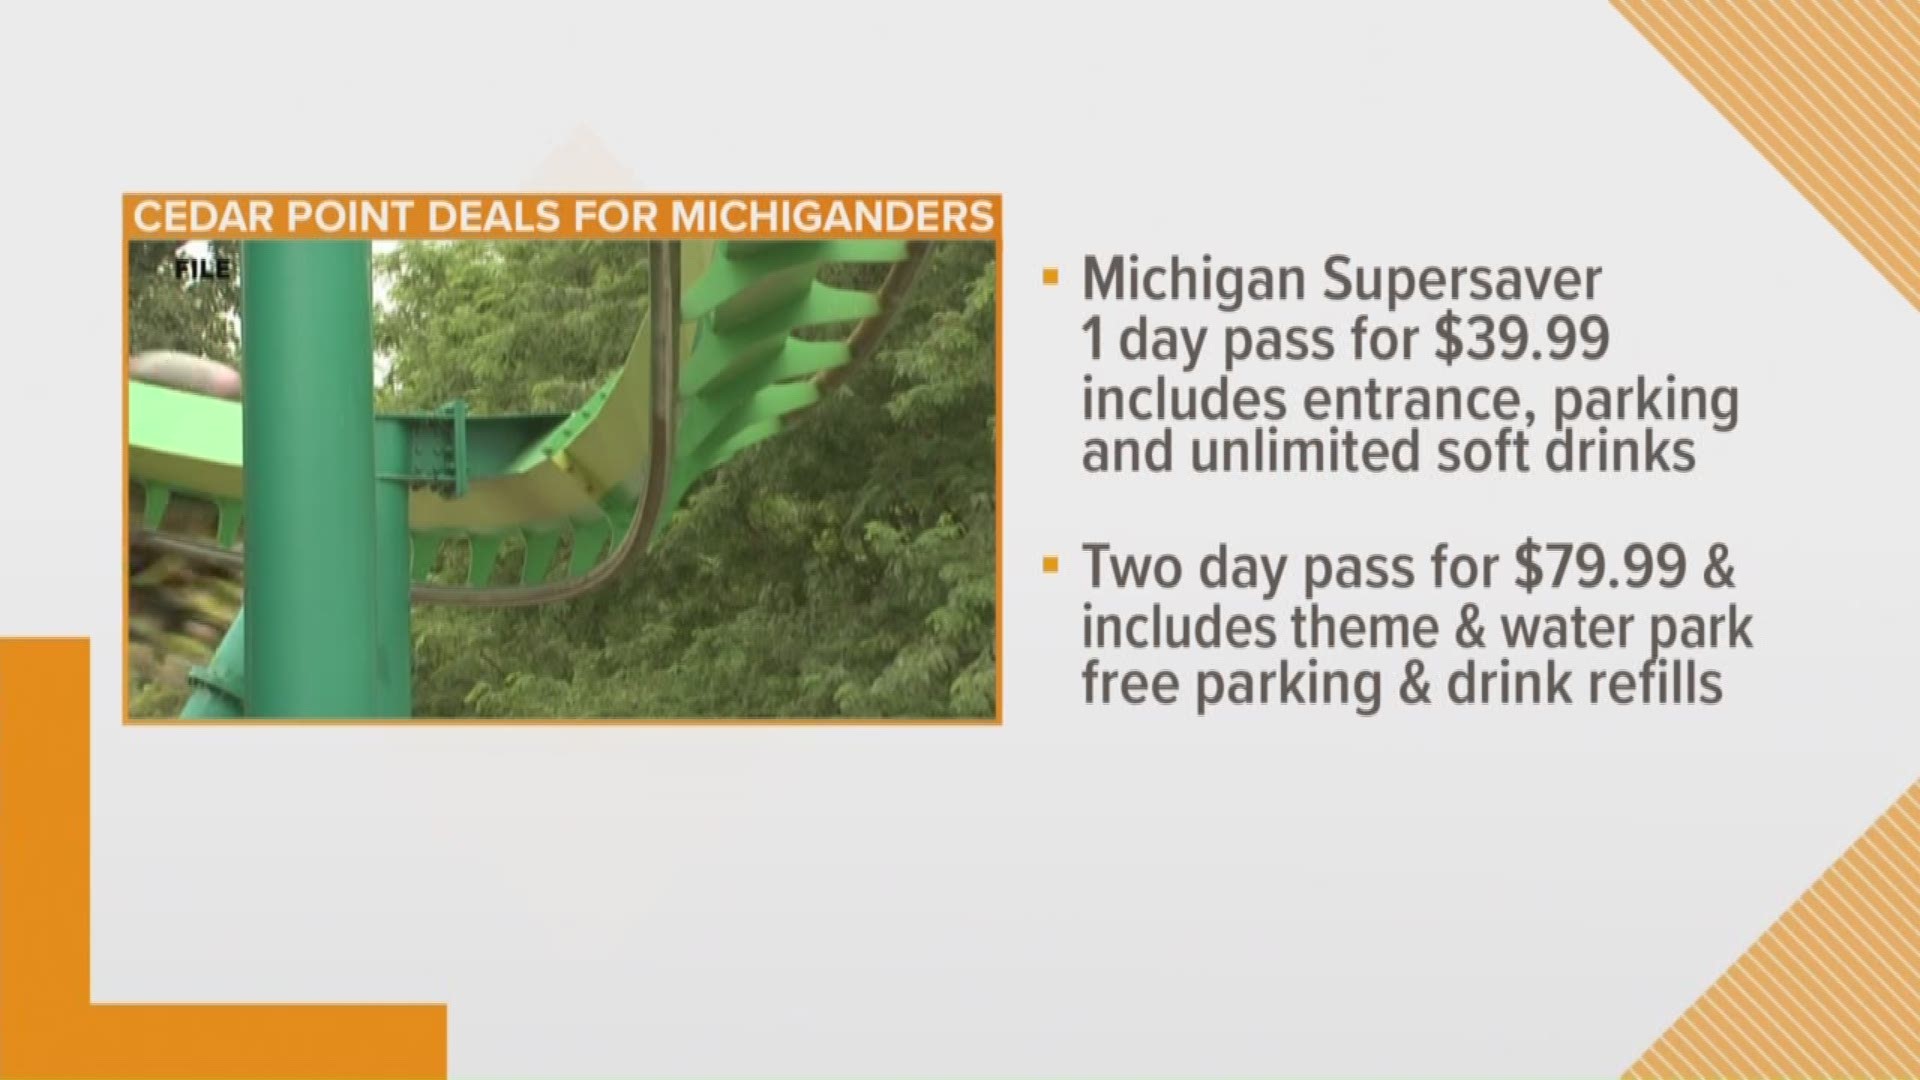 Michigan residents can now purchase one- or two-day passes at a special low price.